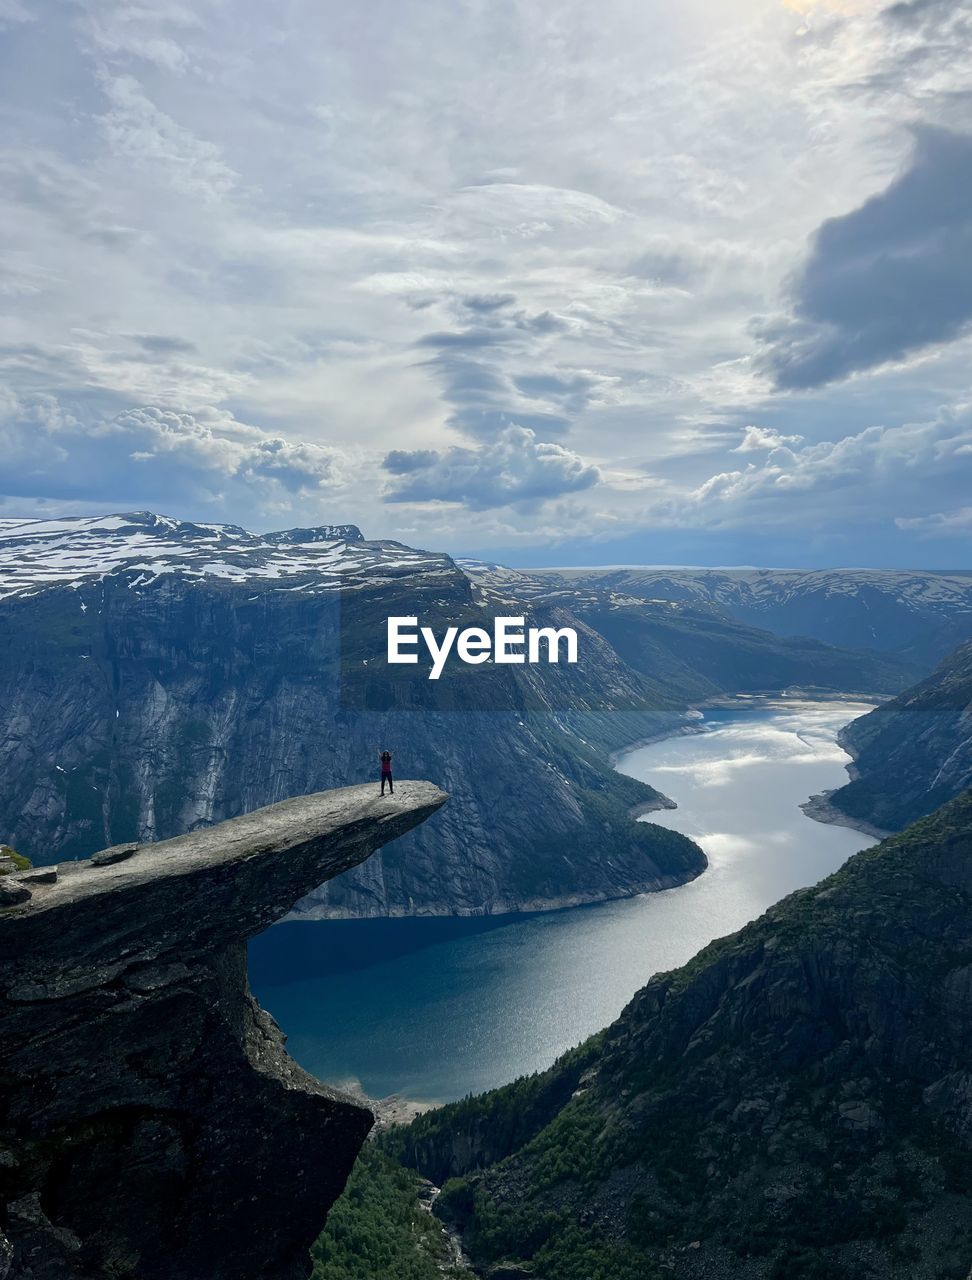 View of trolltunga and the lake below it. i am visibleon top of the trolltunga rock.